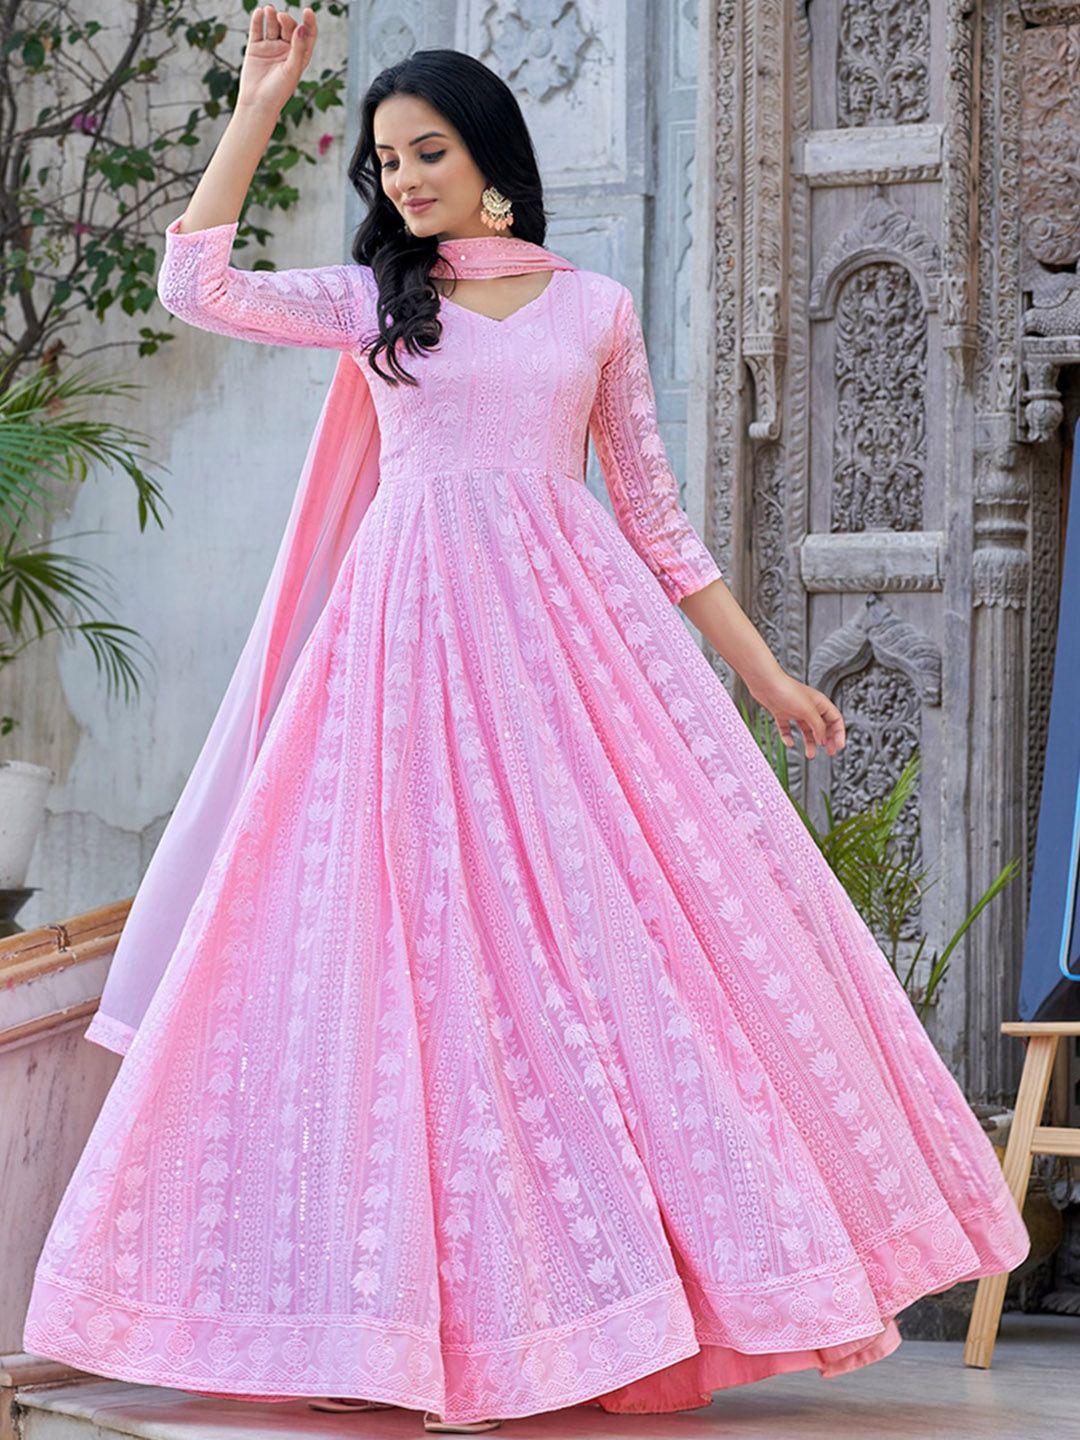 prenea-floral-embroidered-georgette-anarkali-maxi-gown-ethnic-dress-with-dupatta